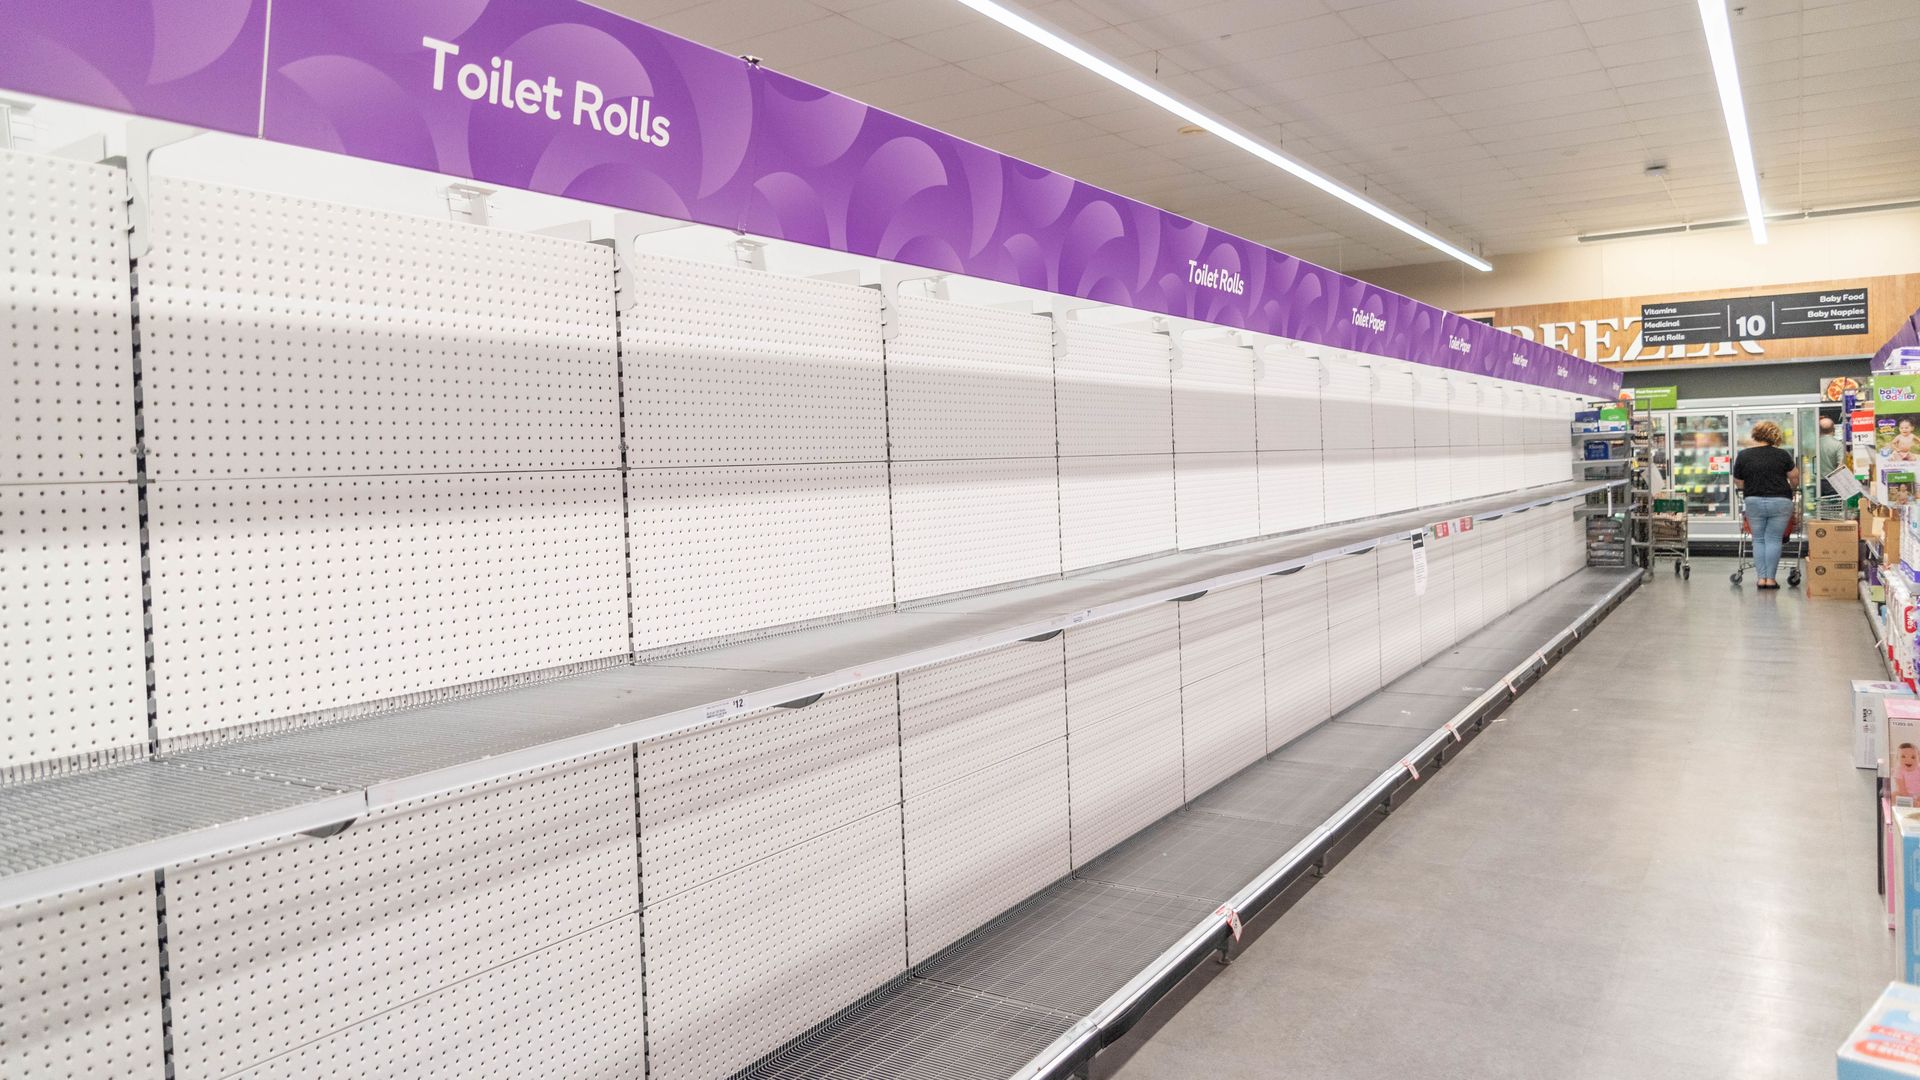 Empty supermarket shelves that formerly held toilet paper